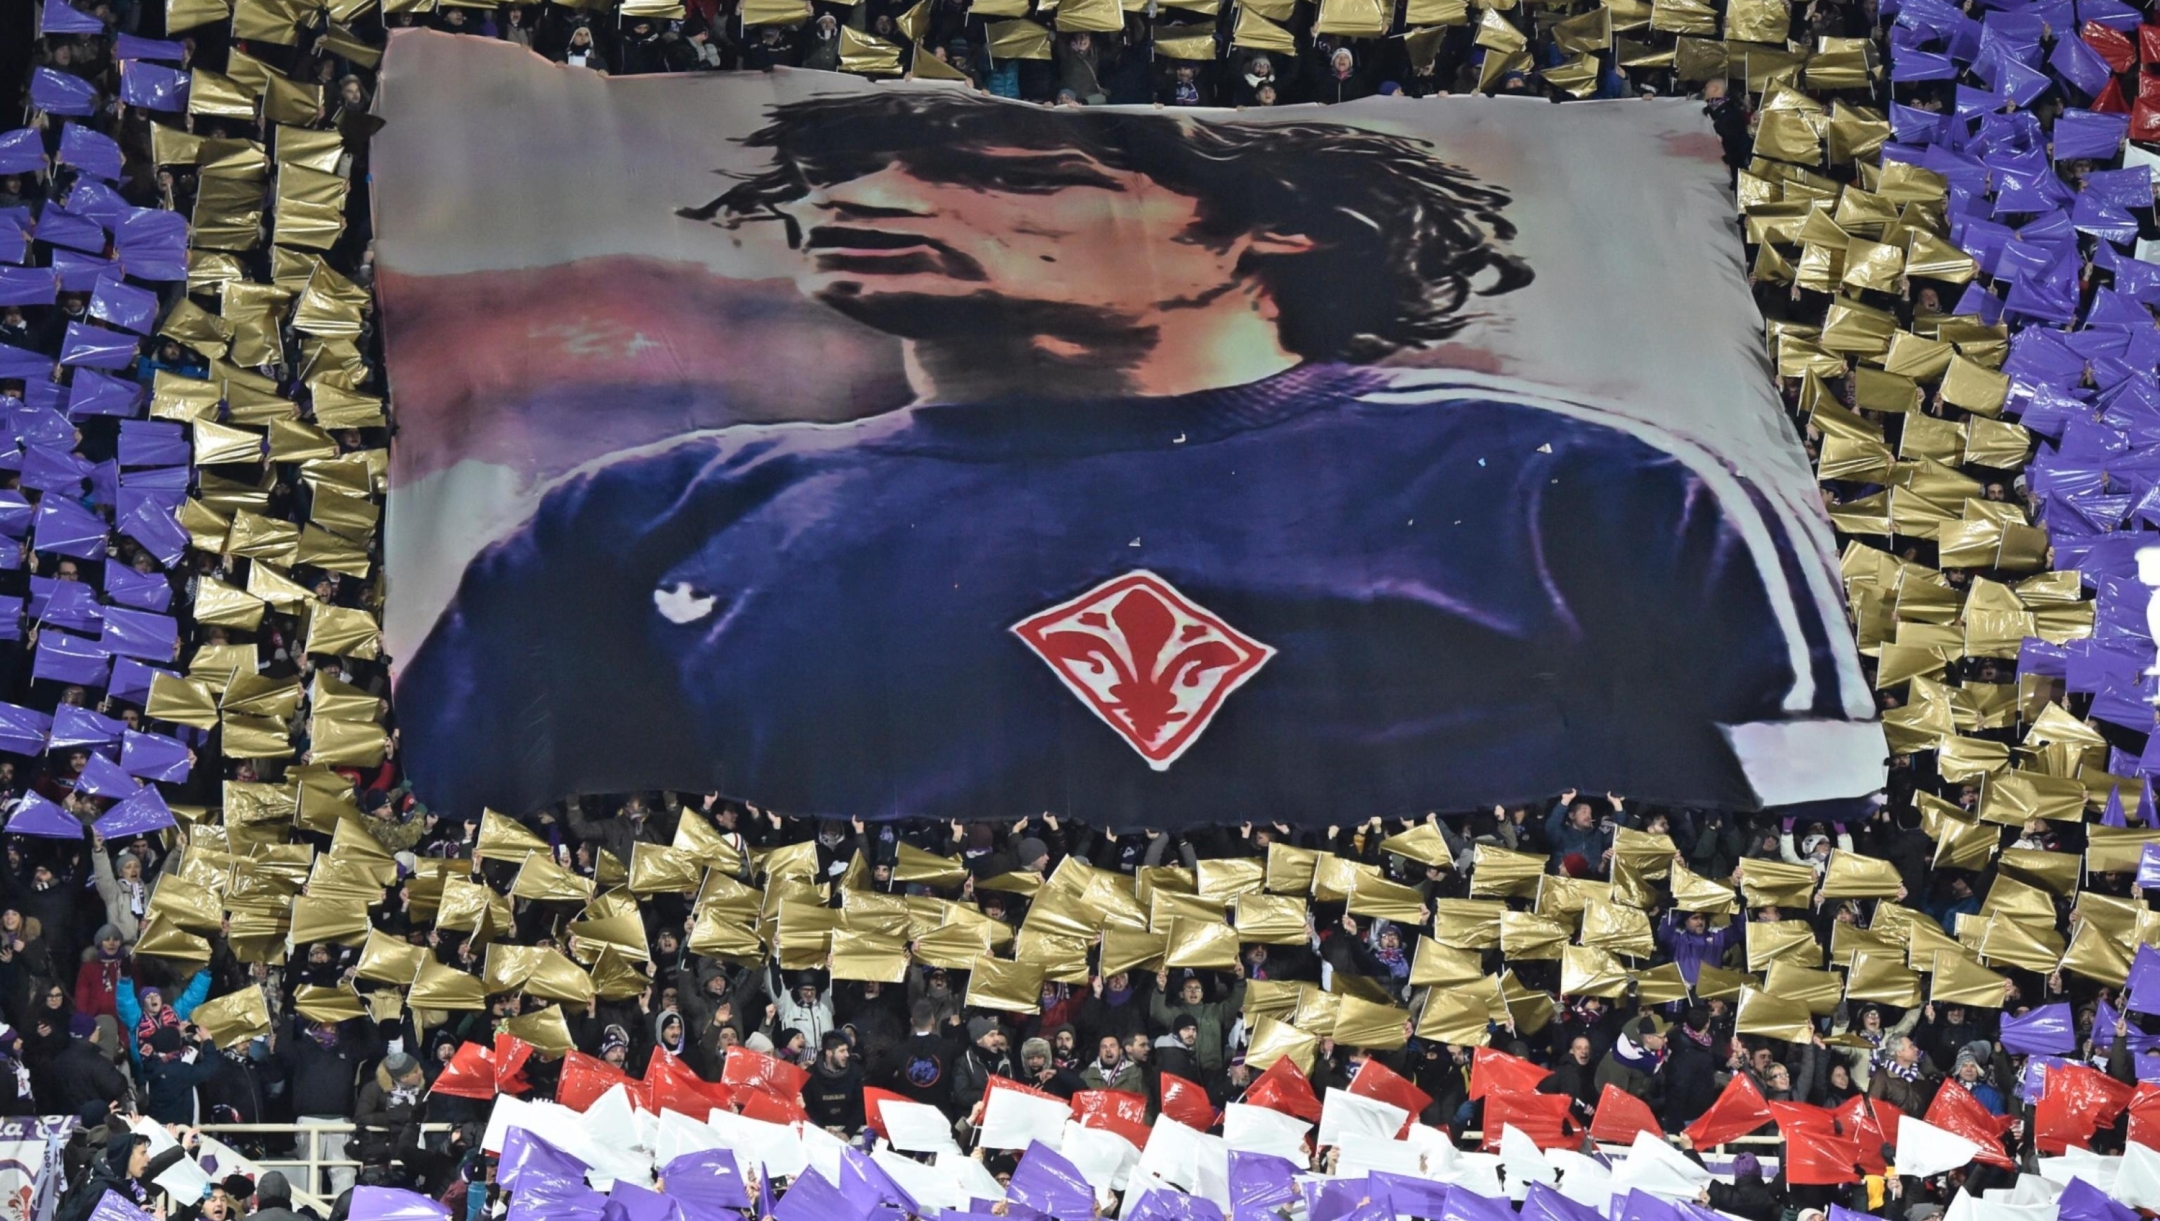 Fiorentina' s Supporters shows a banner with Former Fiorentina's player Giancarlo Antognoni during the soccer match Acf Fiorentina vs Juventus at artemio Franchi stadium in Floence ,Italy, 15 January 2016
ANSA/MAURIZIO DEGL INNOCENTI